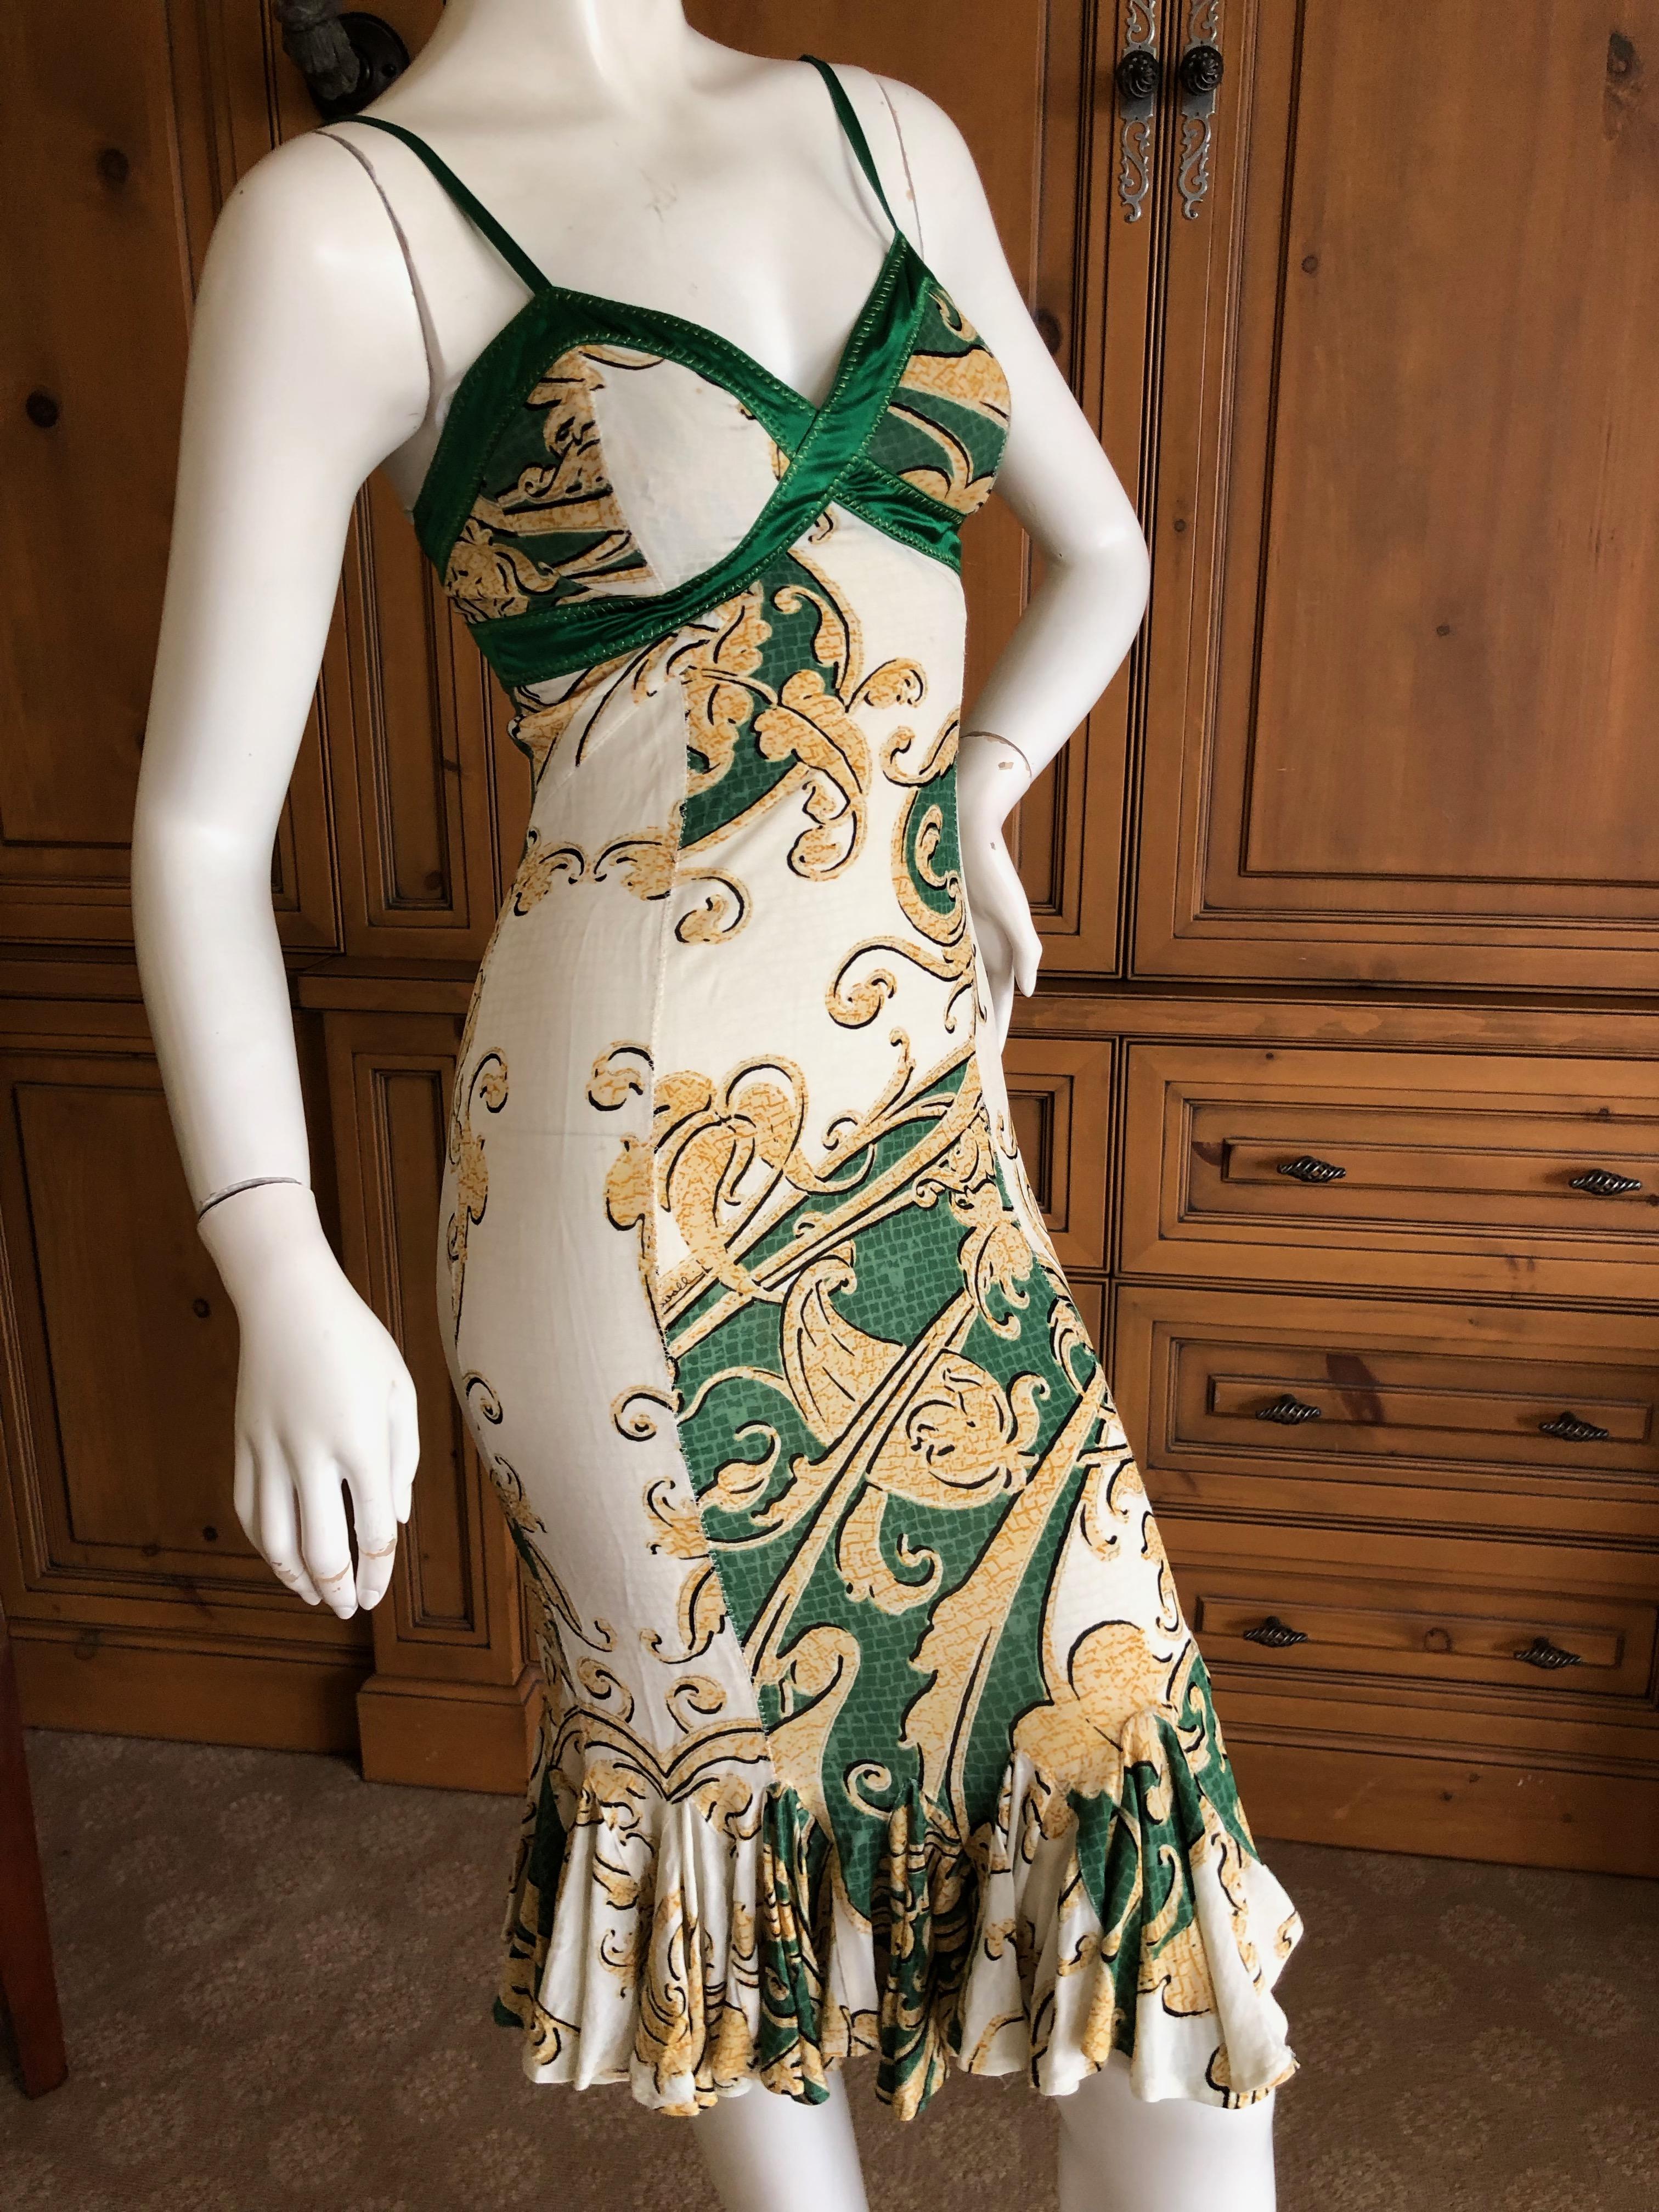 Roberto Cavalli for Just Cavalli Green and Gold Dress with Ruffle Flounce Hem
So pretty
Size 38
Bust 32